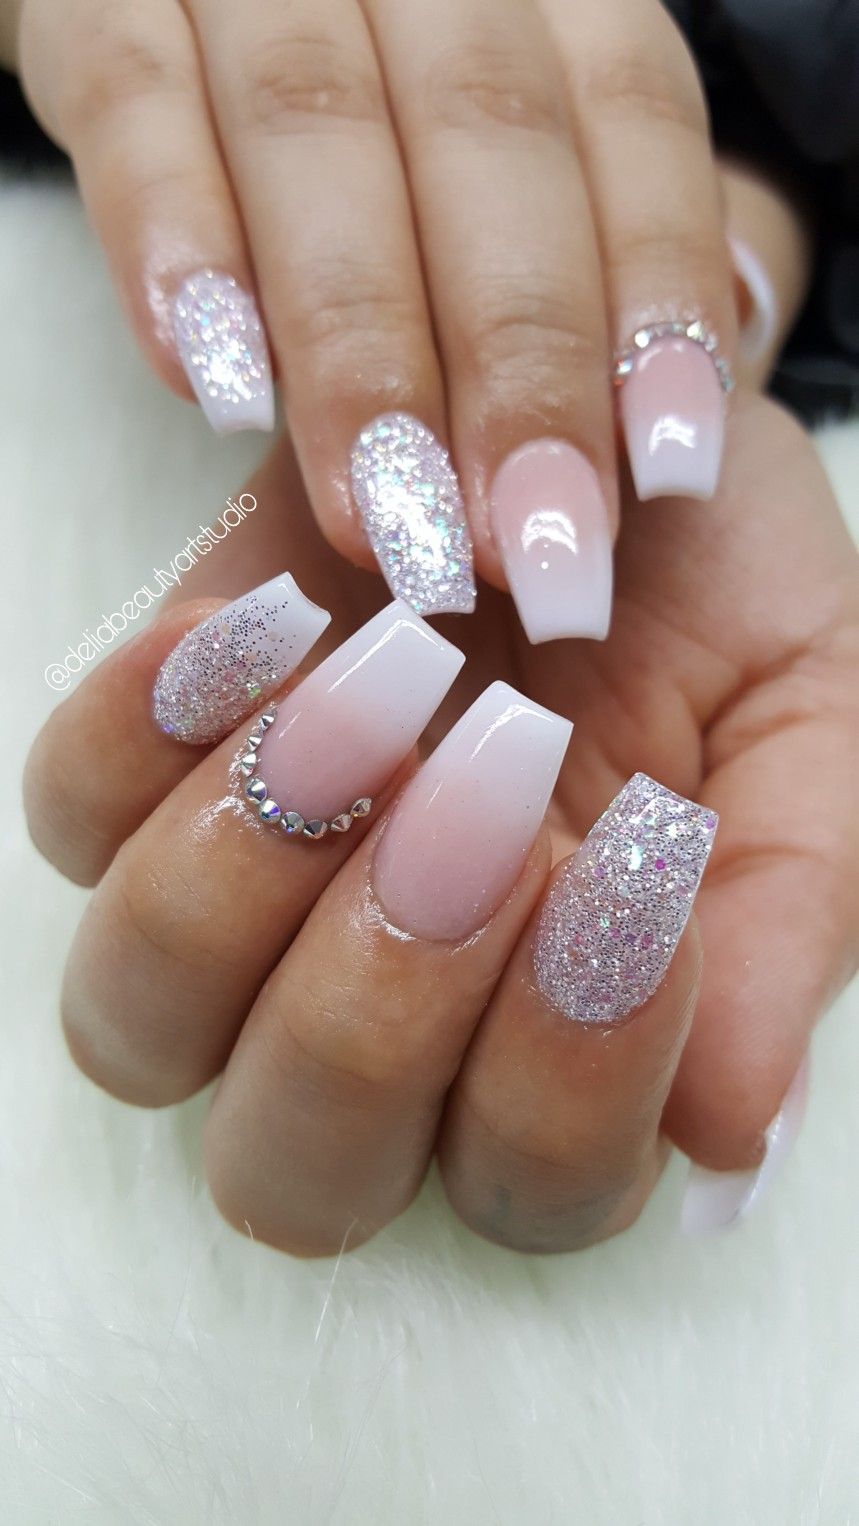 Ombre Acrylic Nails Coffin Shape Pink Glitter Nails Ombre Acrylic Nails Coffin Shape Nails